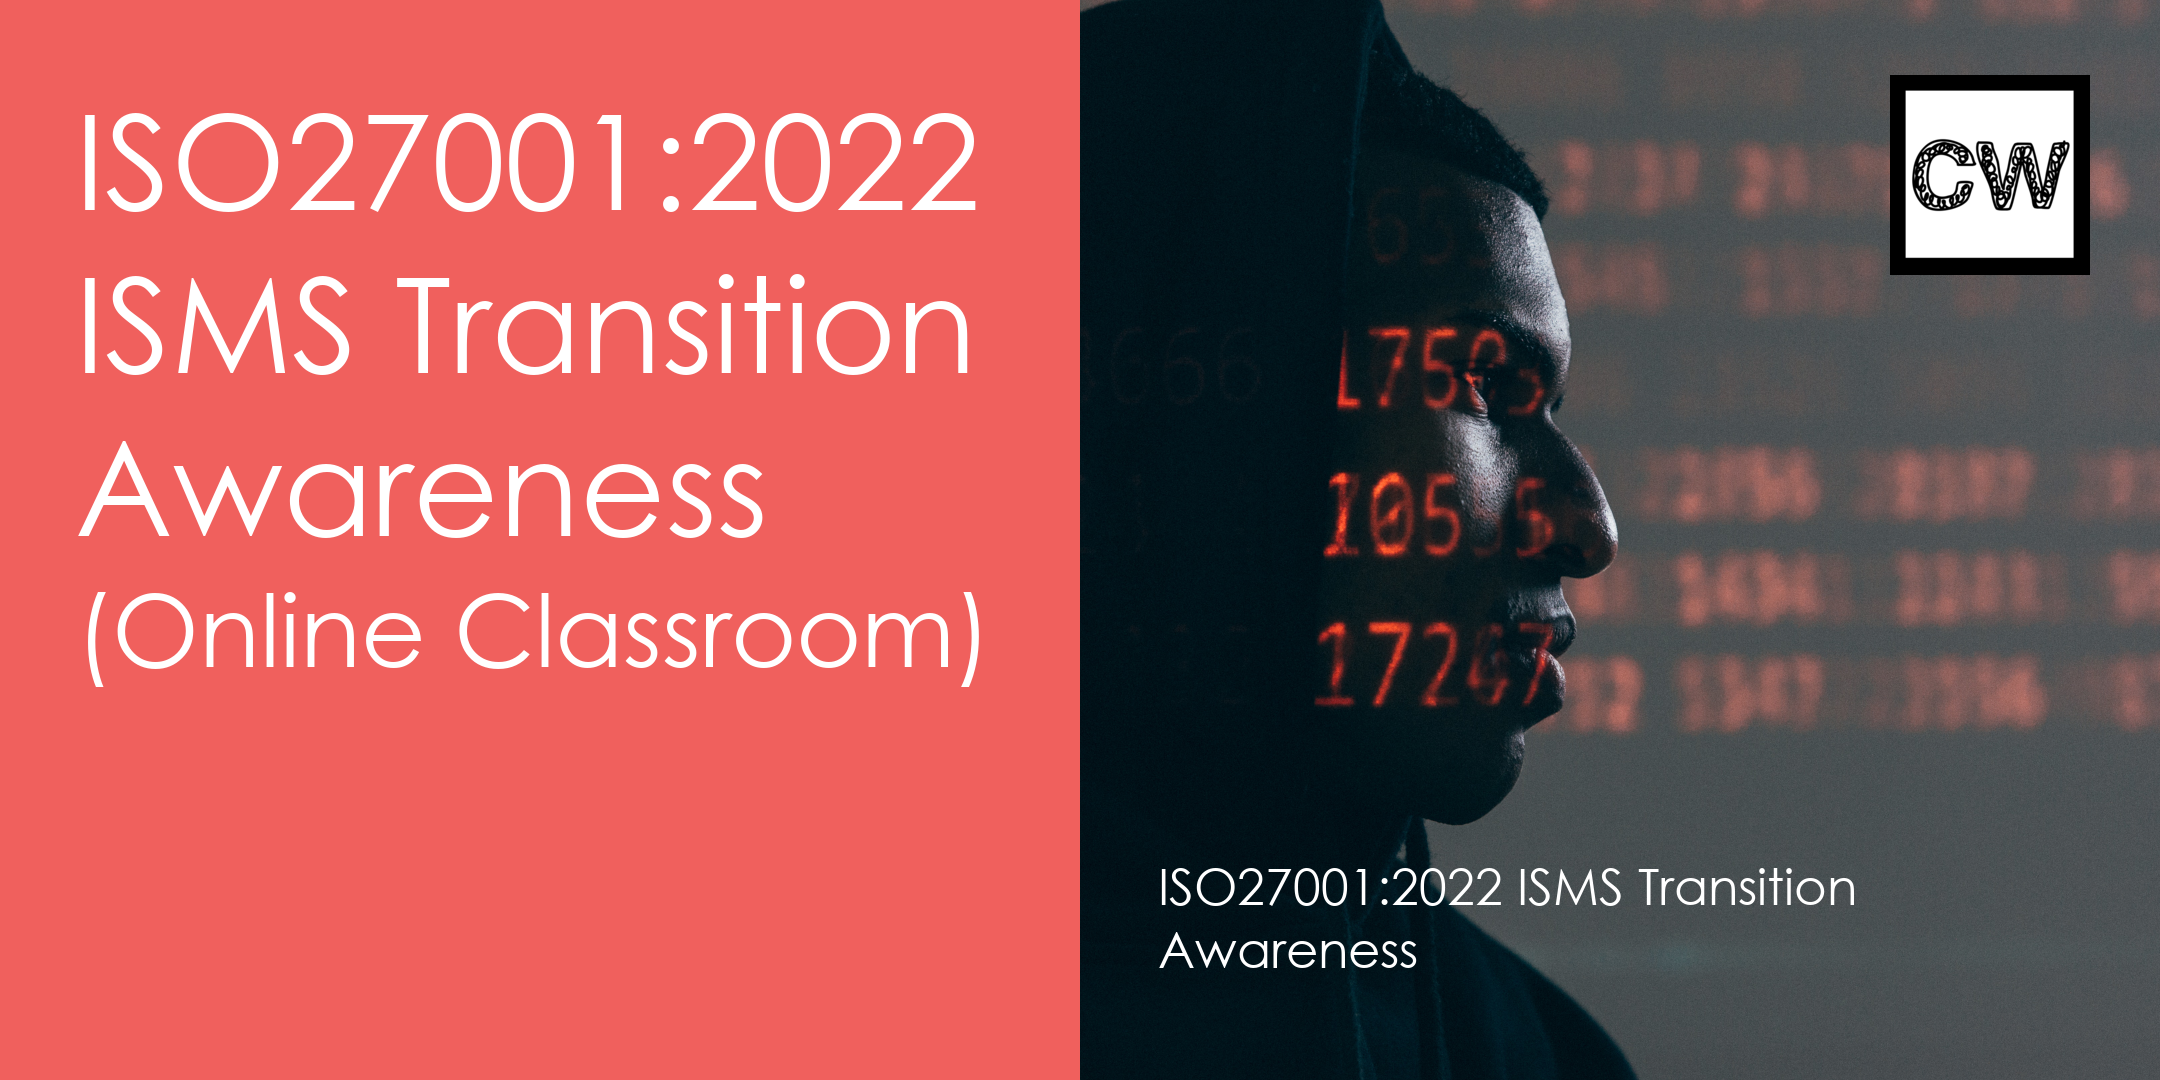 ISO 27001:2002 ISMS Transition Awareness